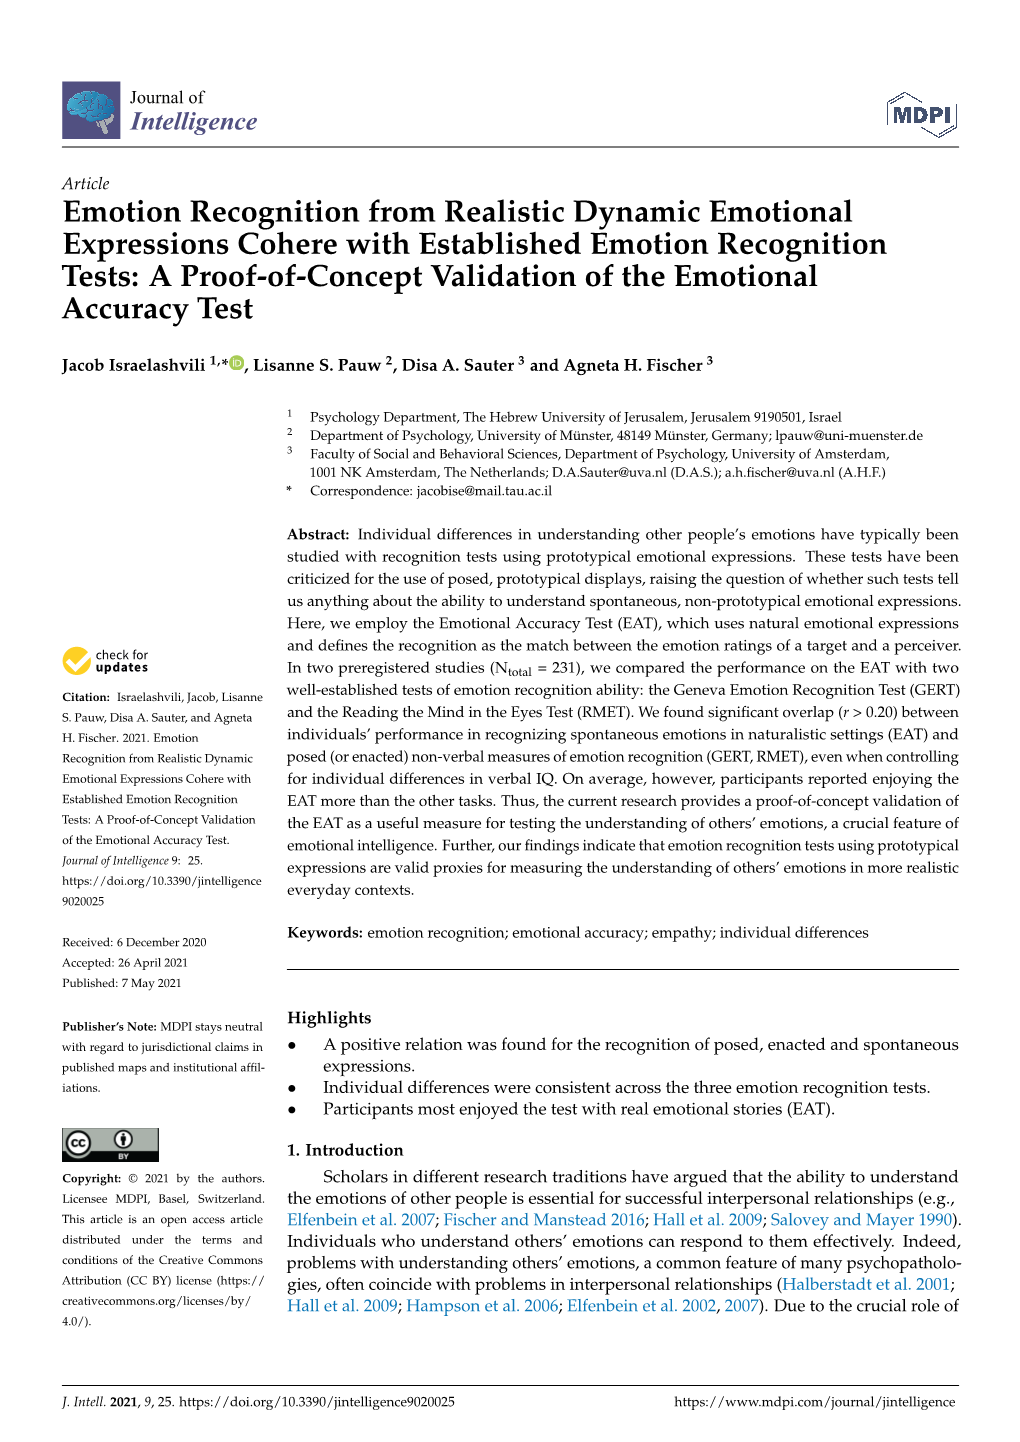 Emotion Recognition from Realistic Dynamic Emotional Expressions Cohere with Established Emotion Recognition Tests: a Proof-Of-C